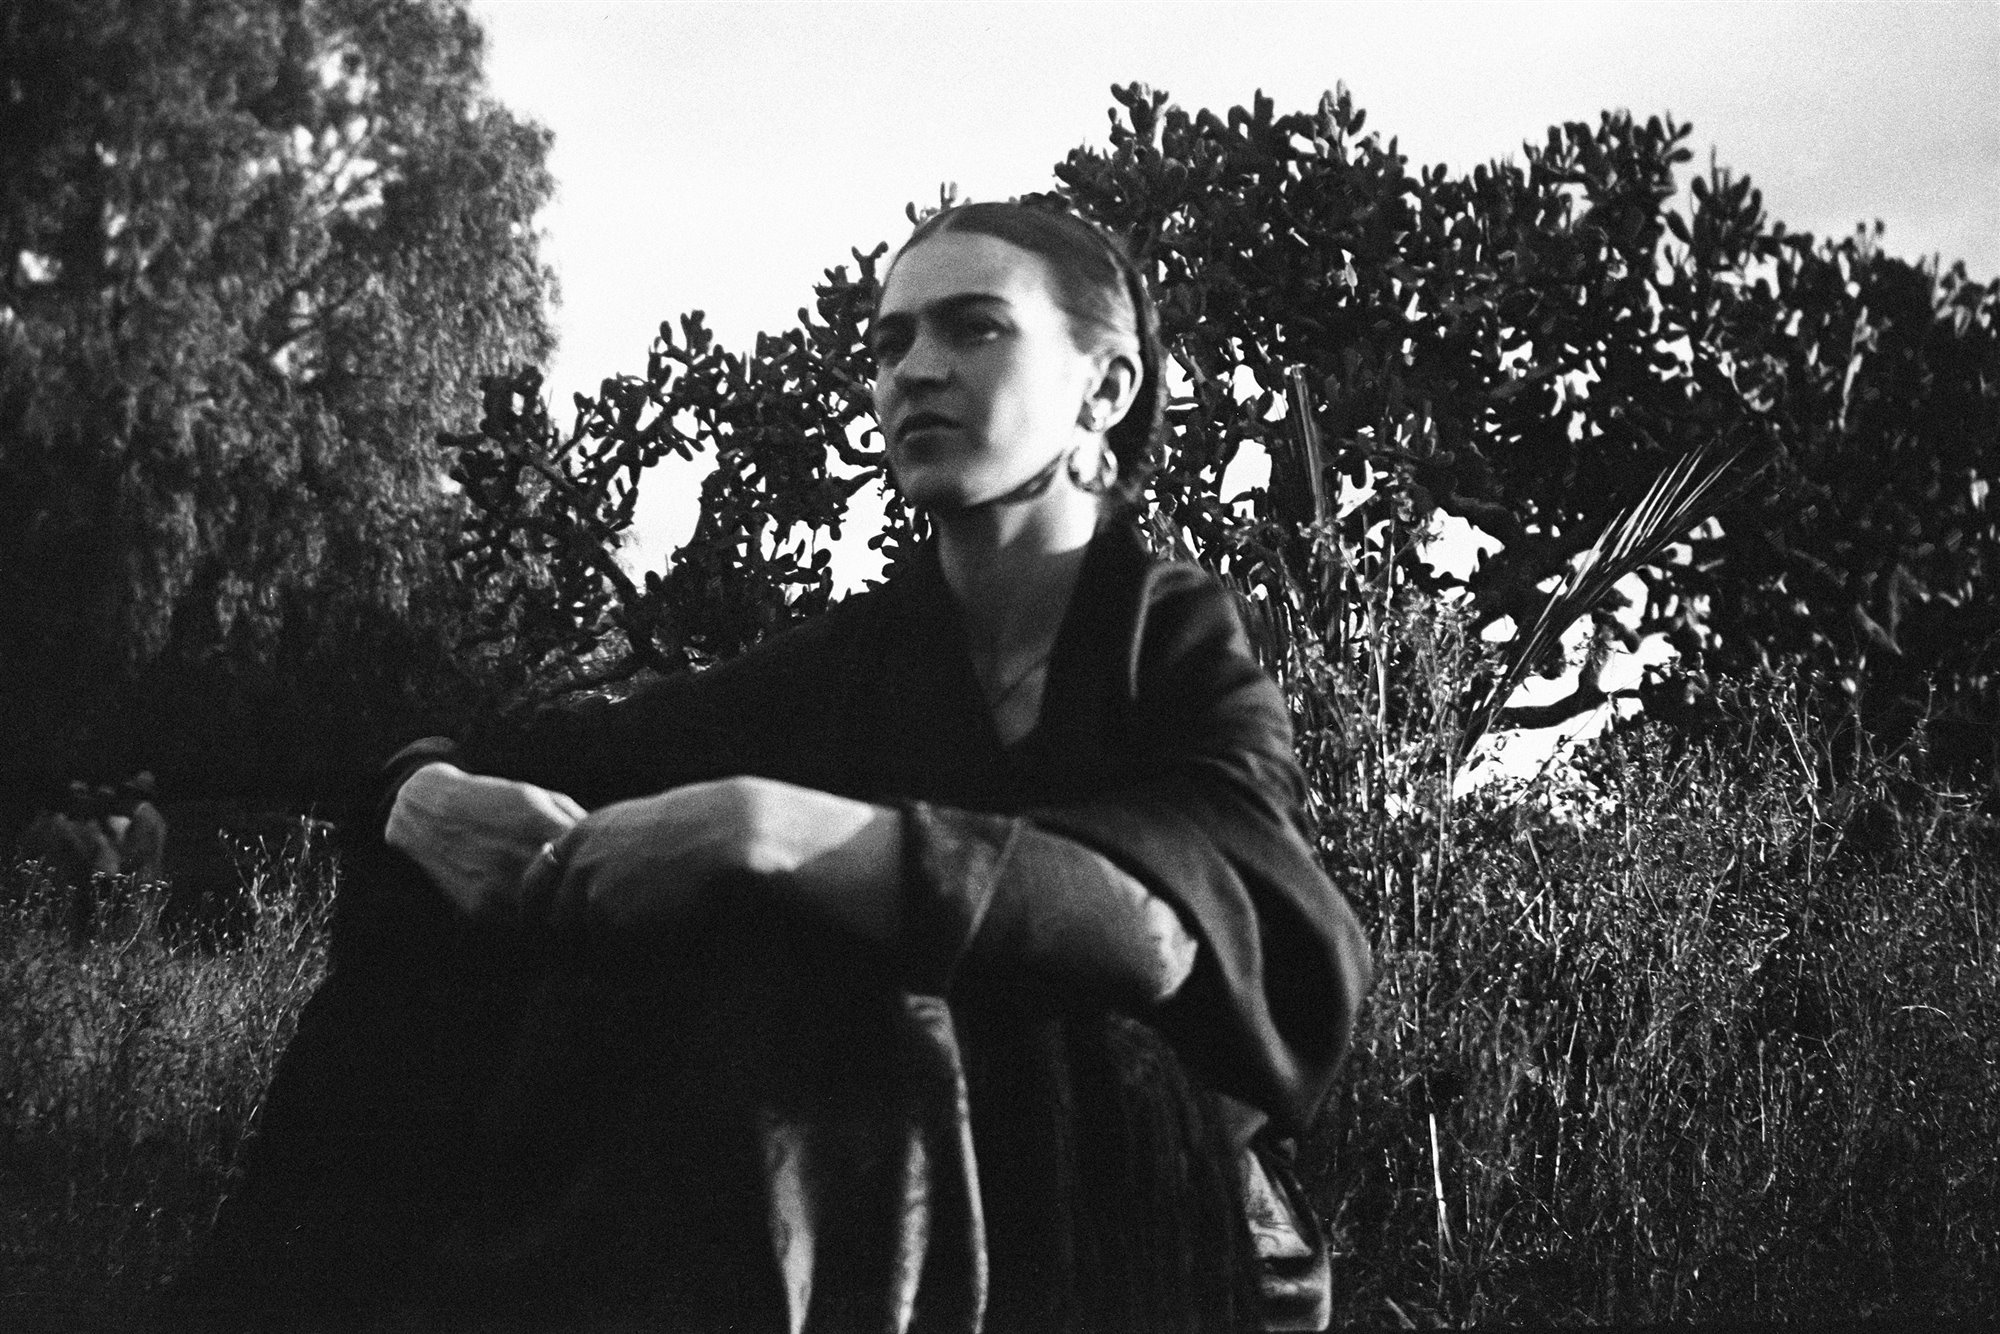 Frida by the Cactus, Mexico, 1932